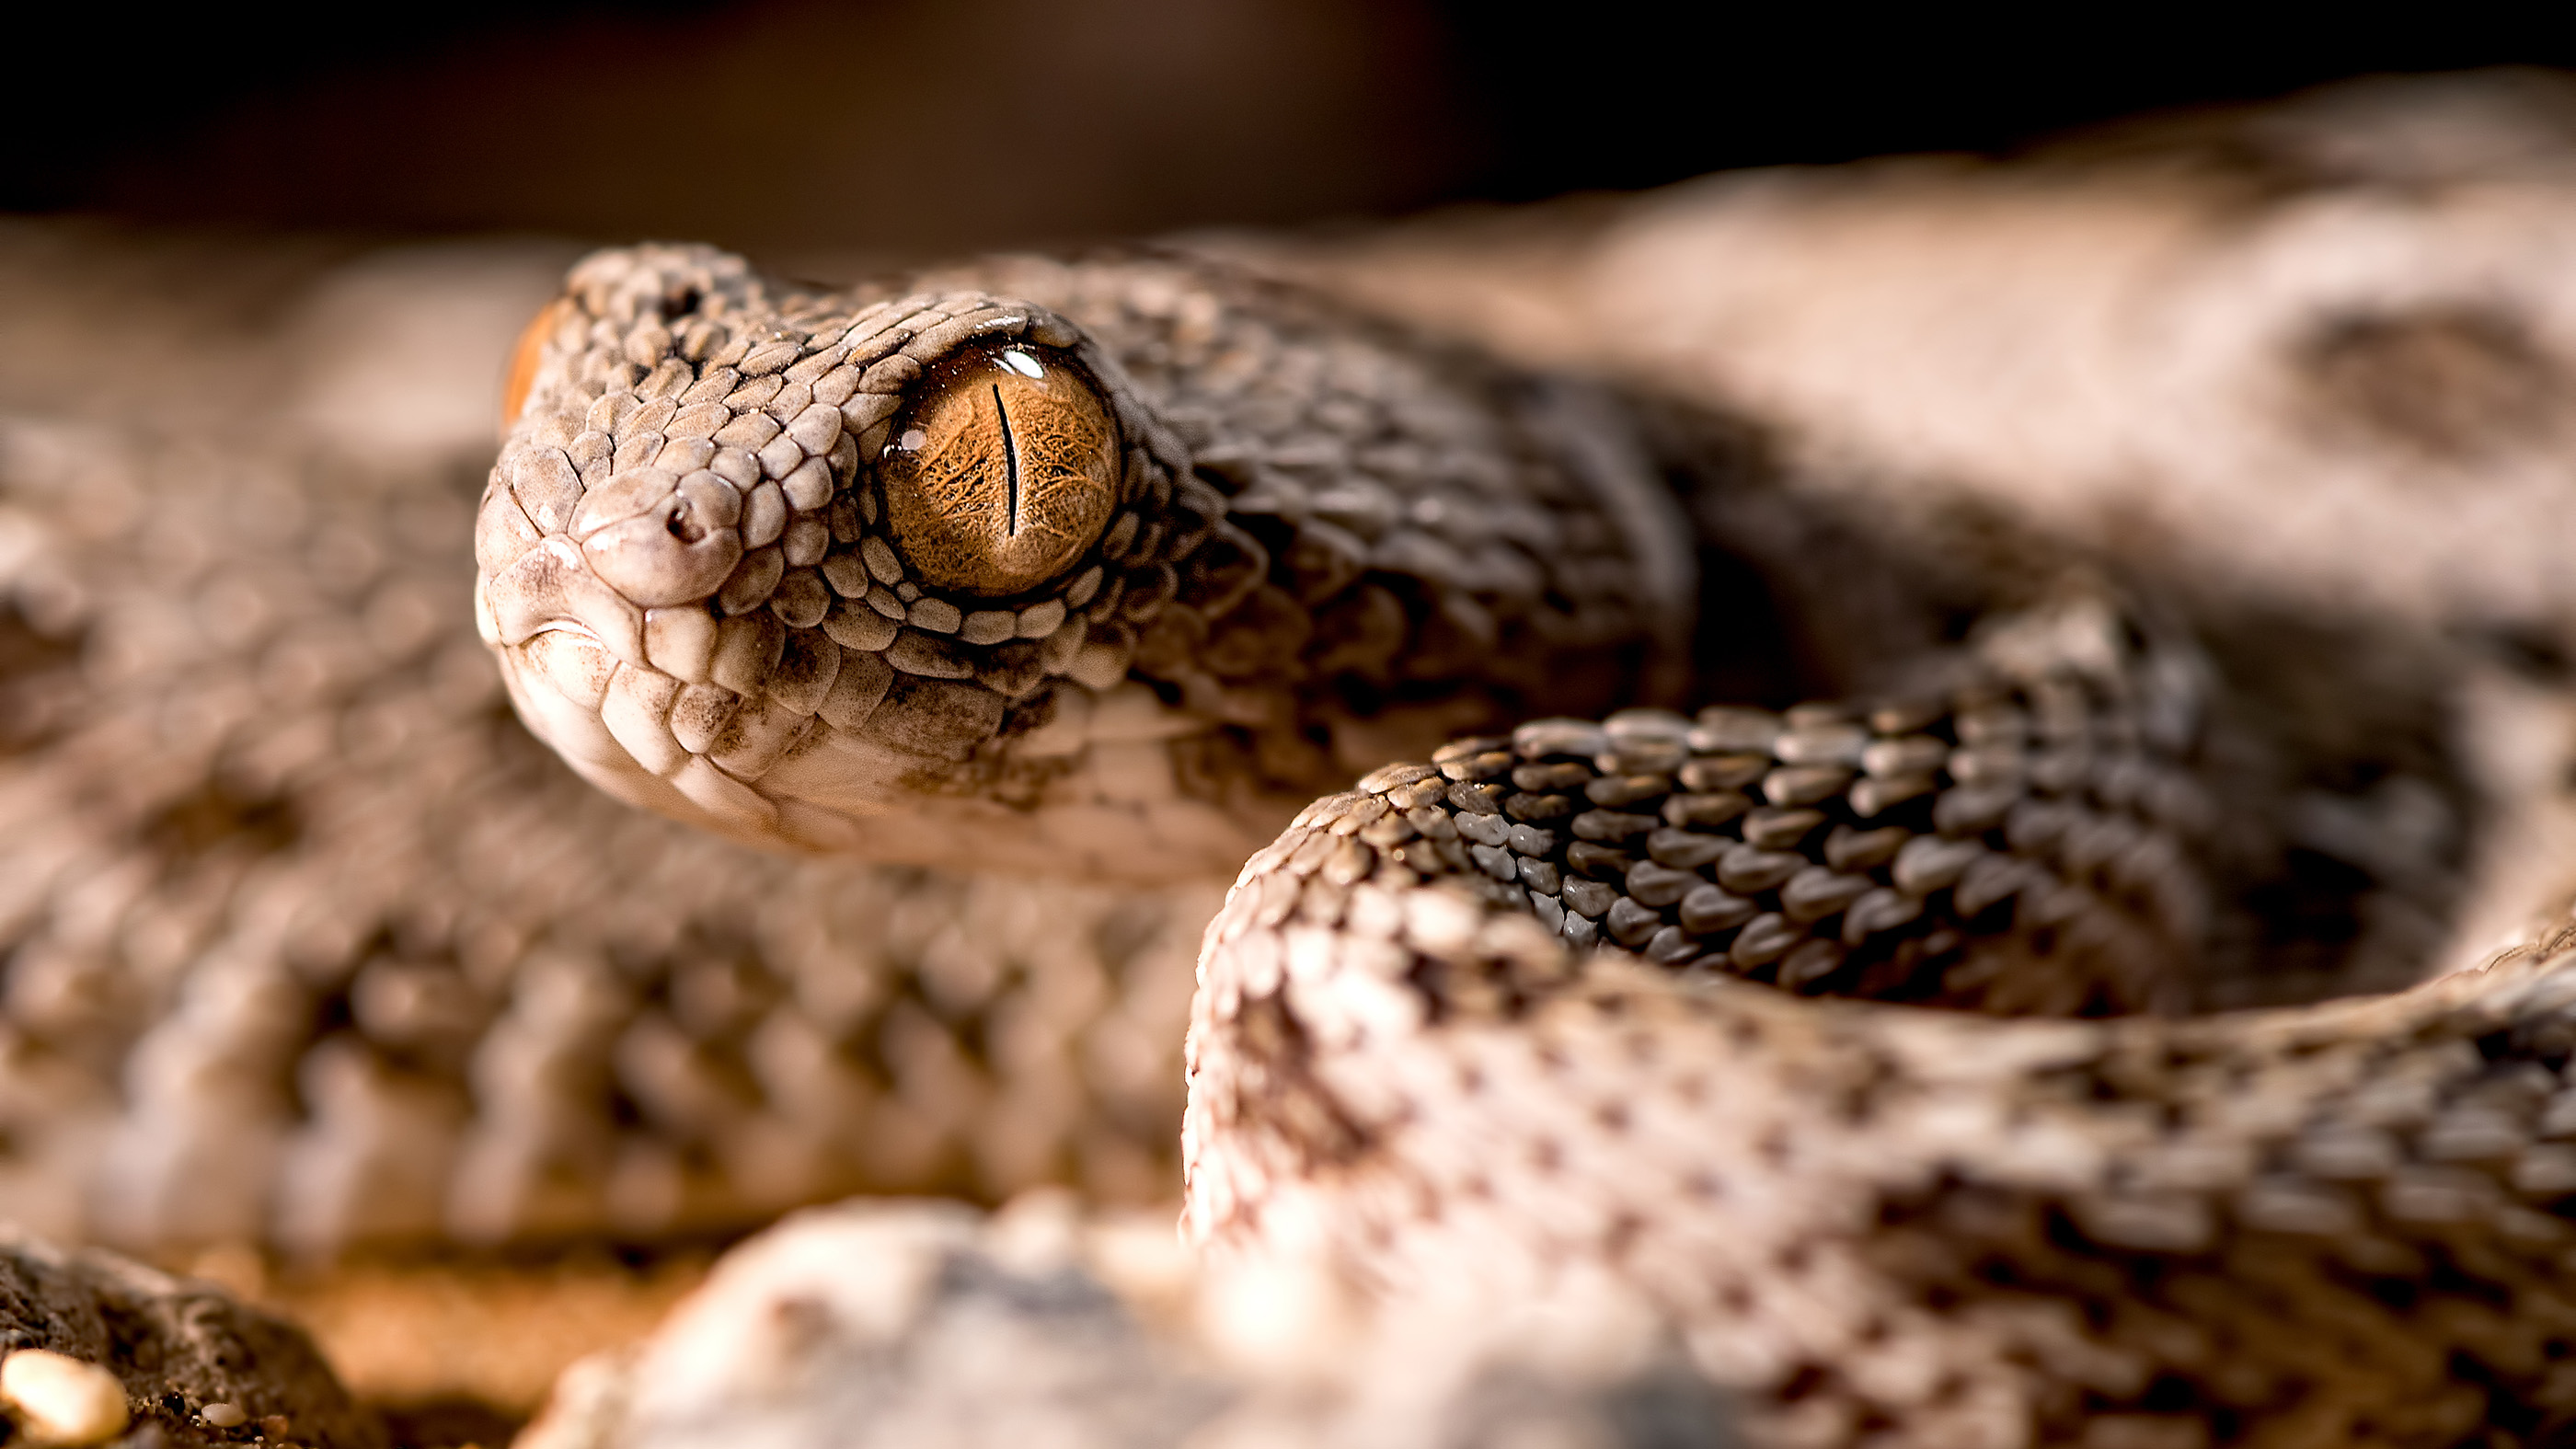 What is considered the most venomous snake?